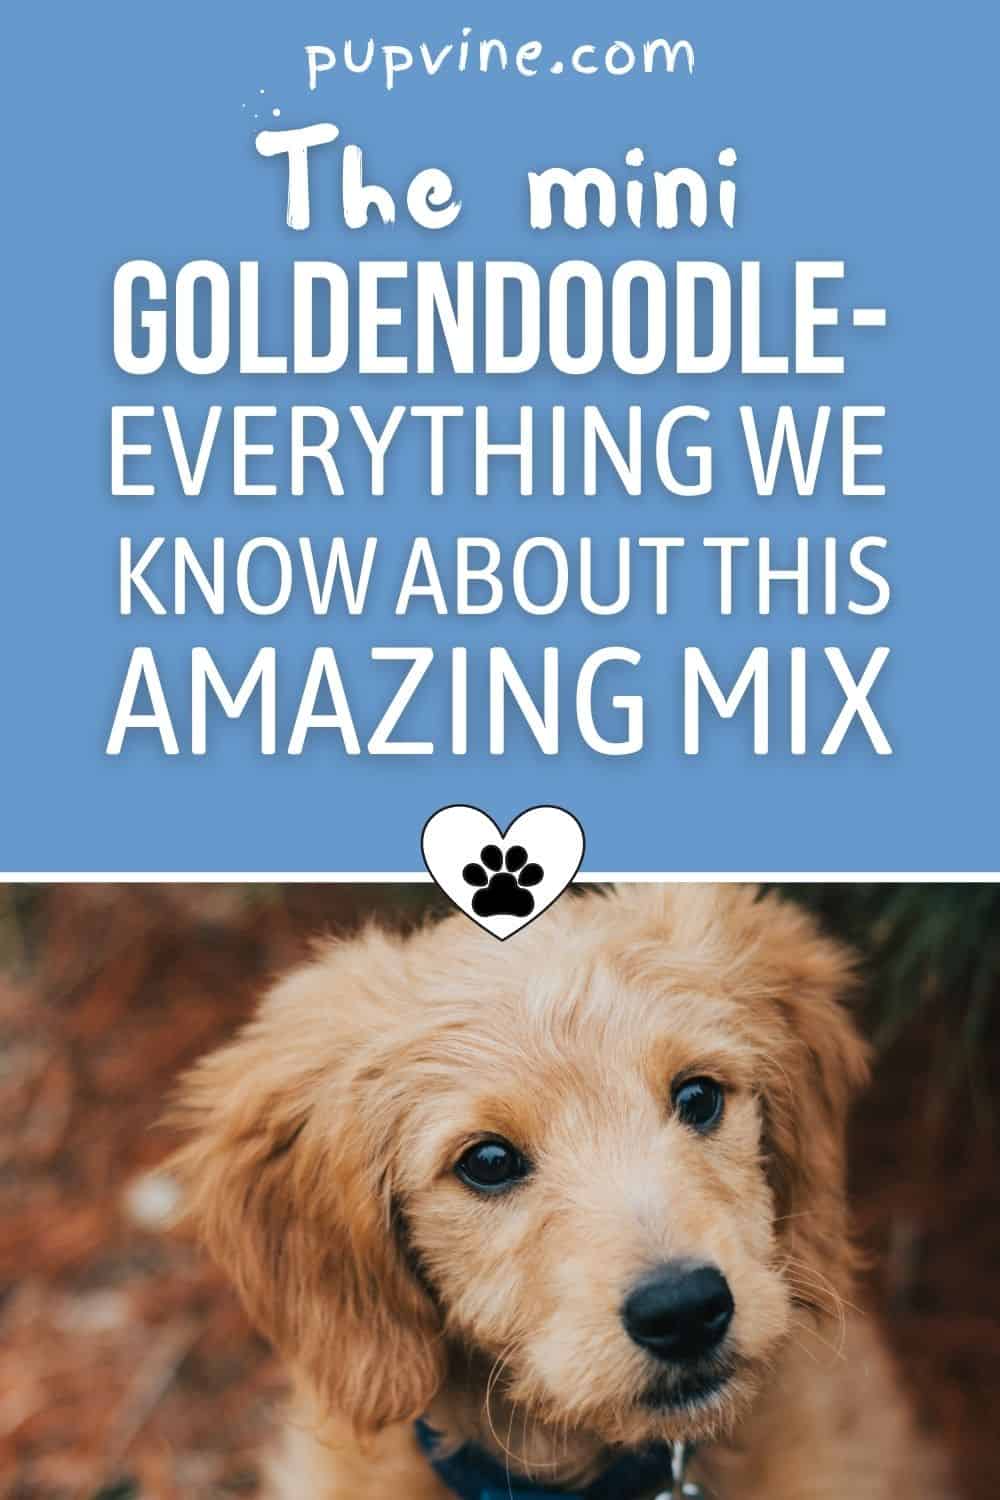 The Mini Goldendoodle - Everything We Know About This Amazing Mix